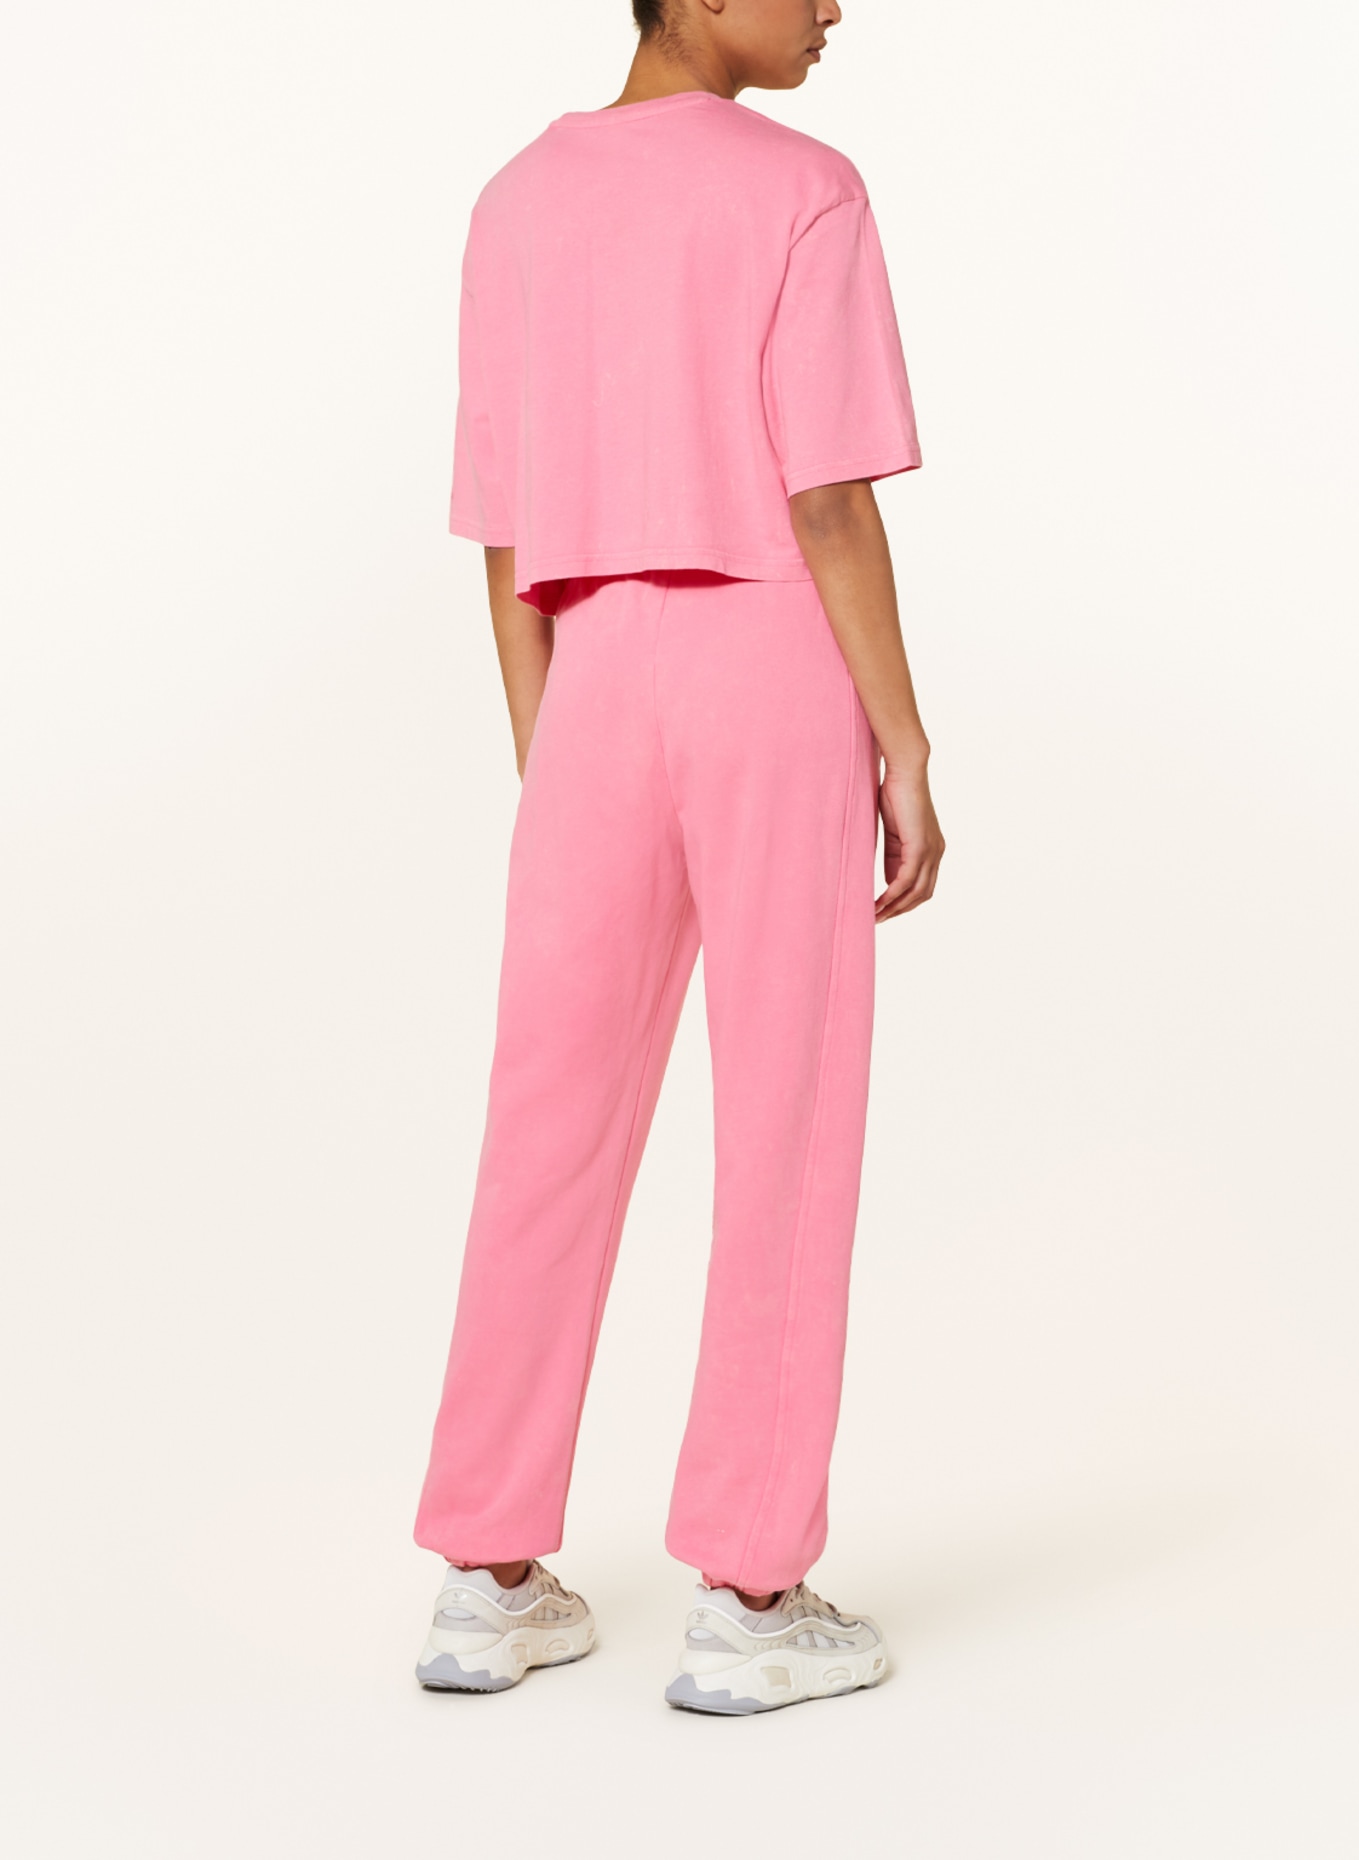 adidas Sweatpants ALL SZN, Color: PINK (Image 3)